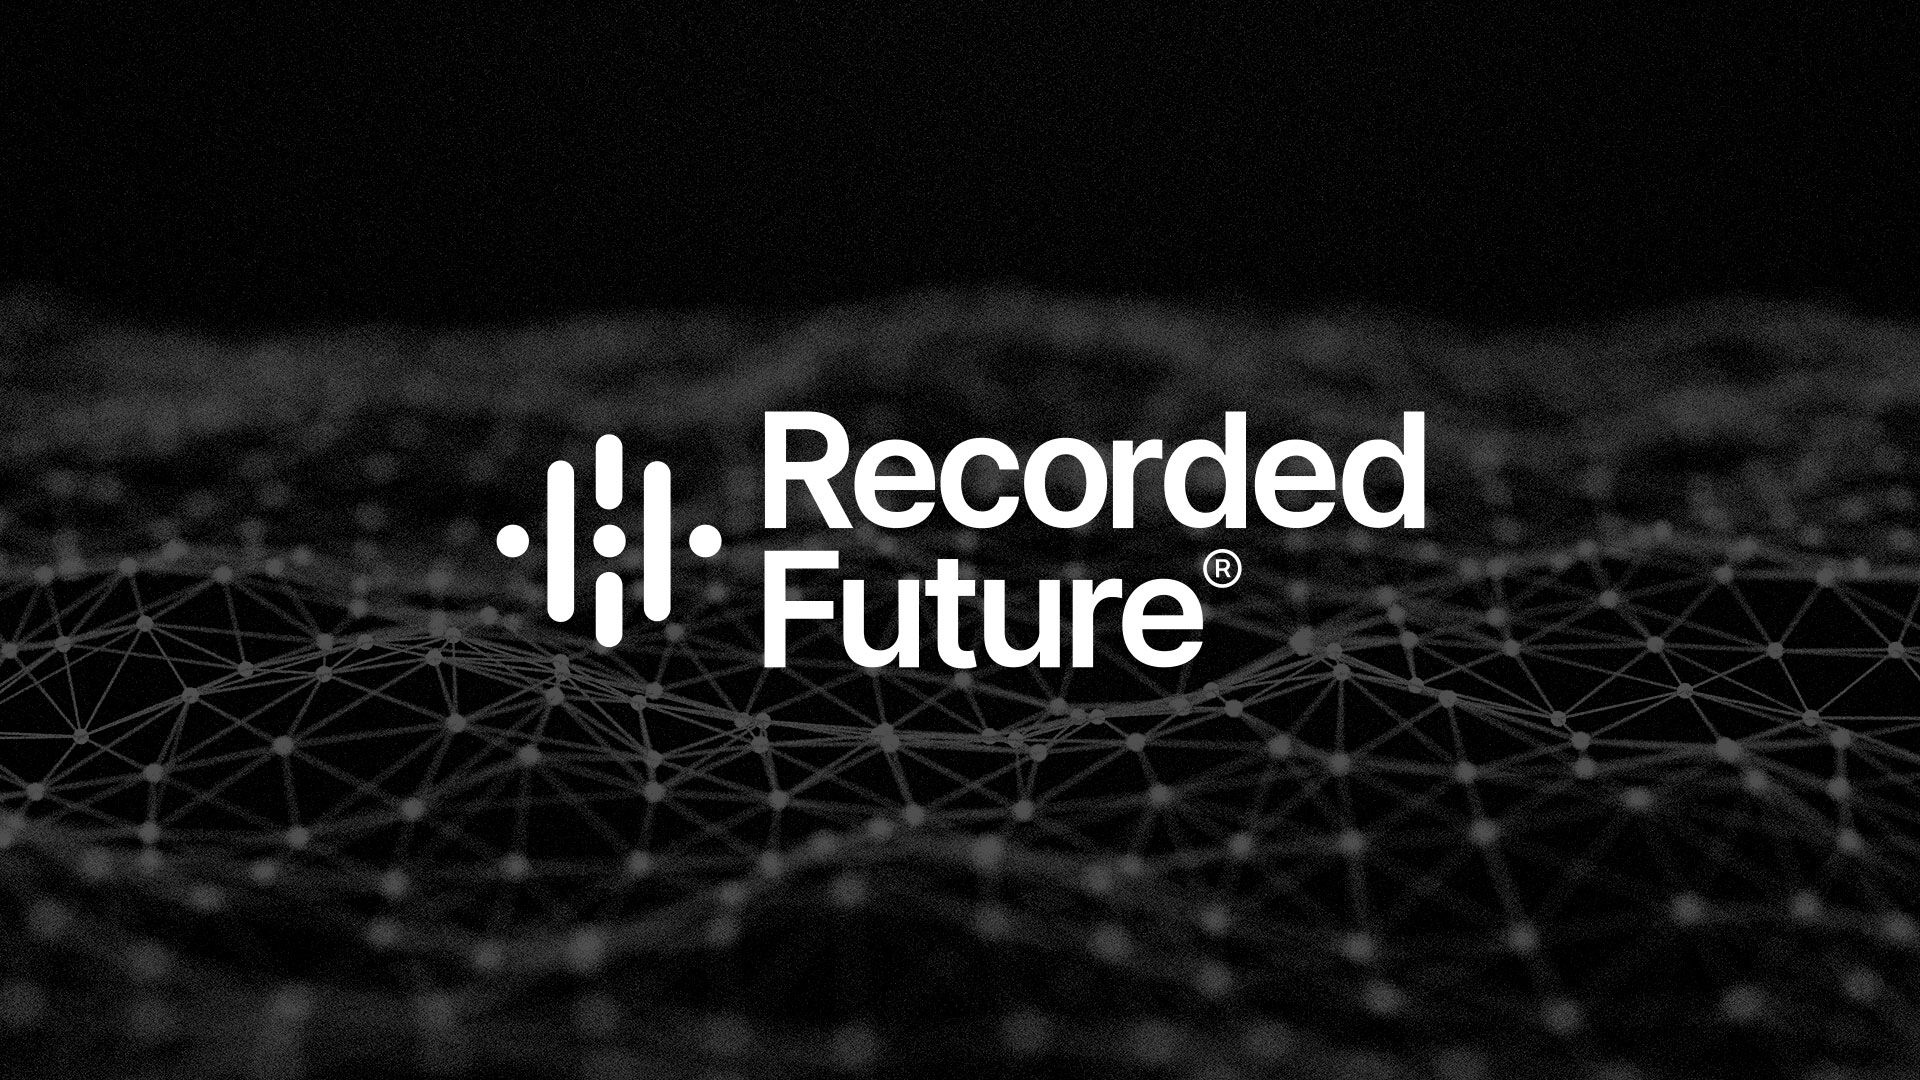 Recorded Future Strengthens Relationship With Amazon Web Services, Supports Amazon GuardDuty